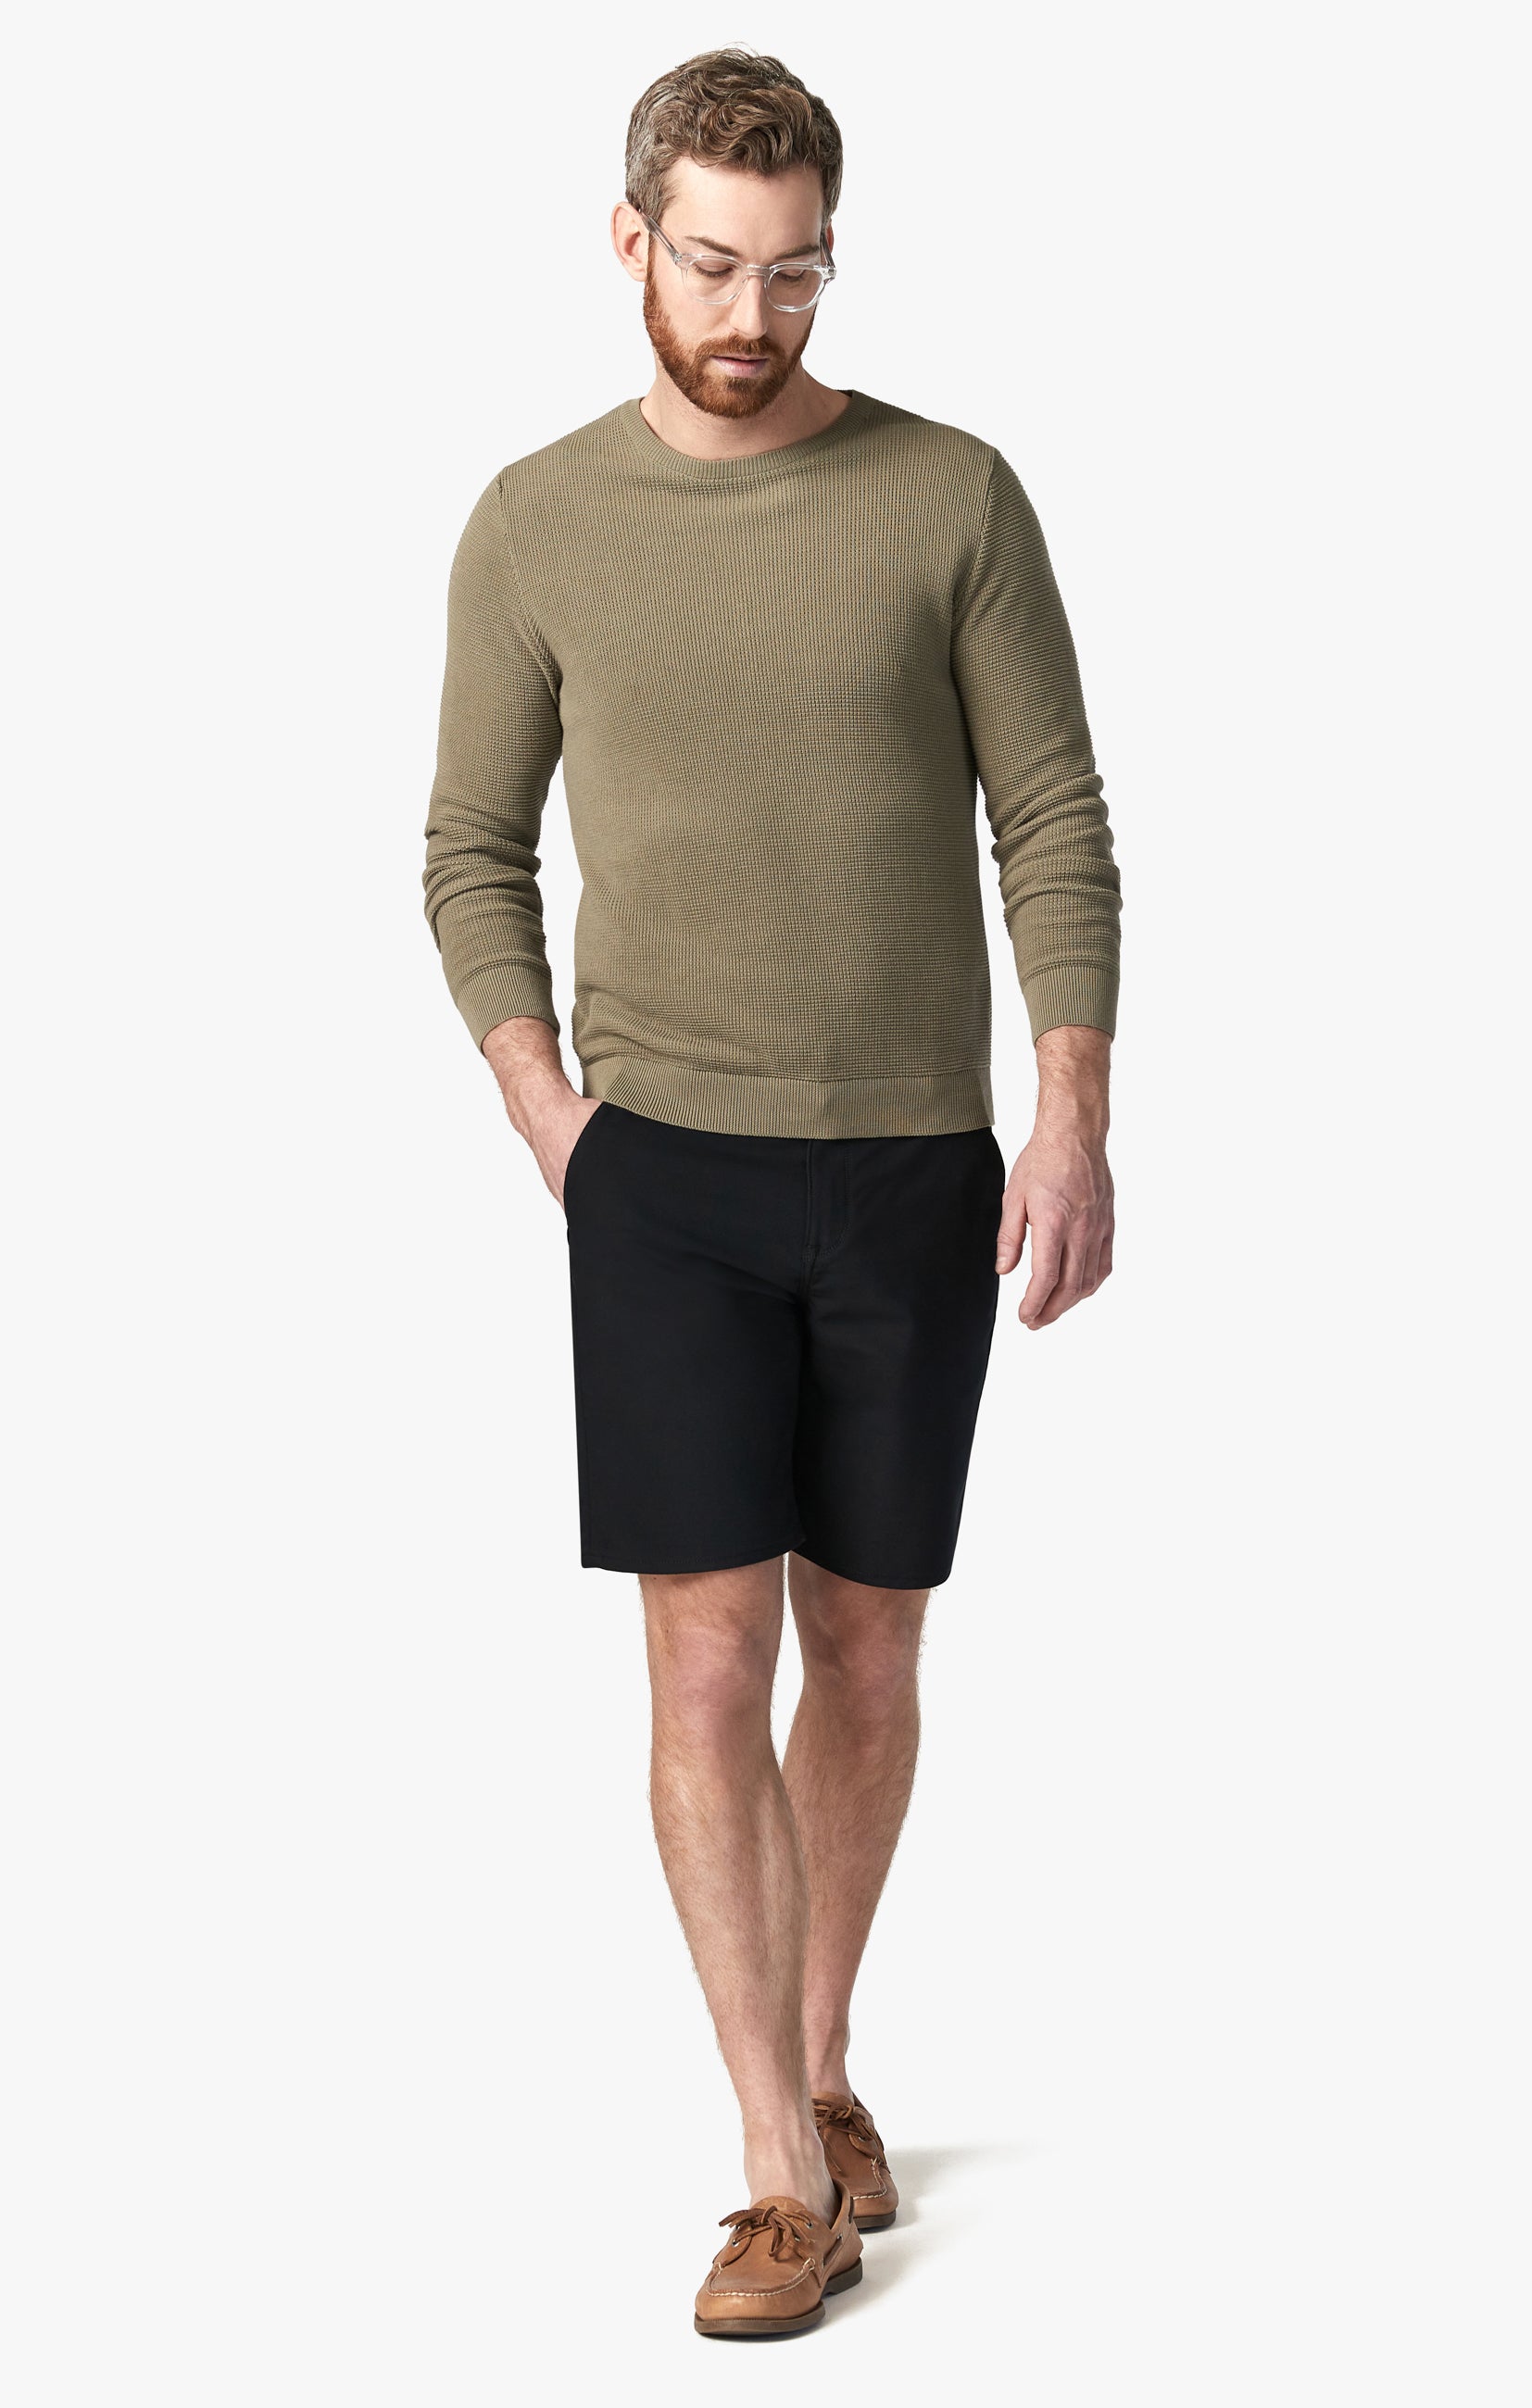 Como Shorts in Onyx Commuter Image 1